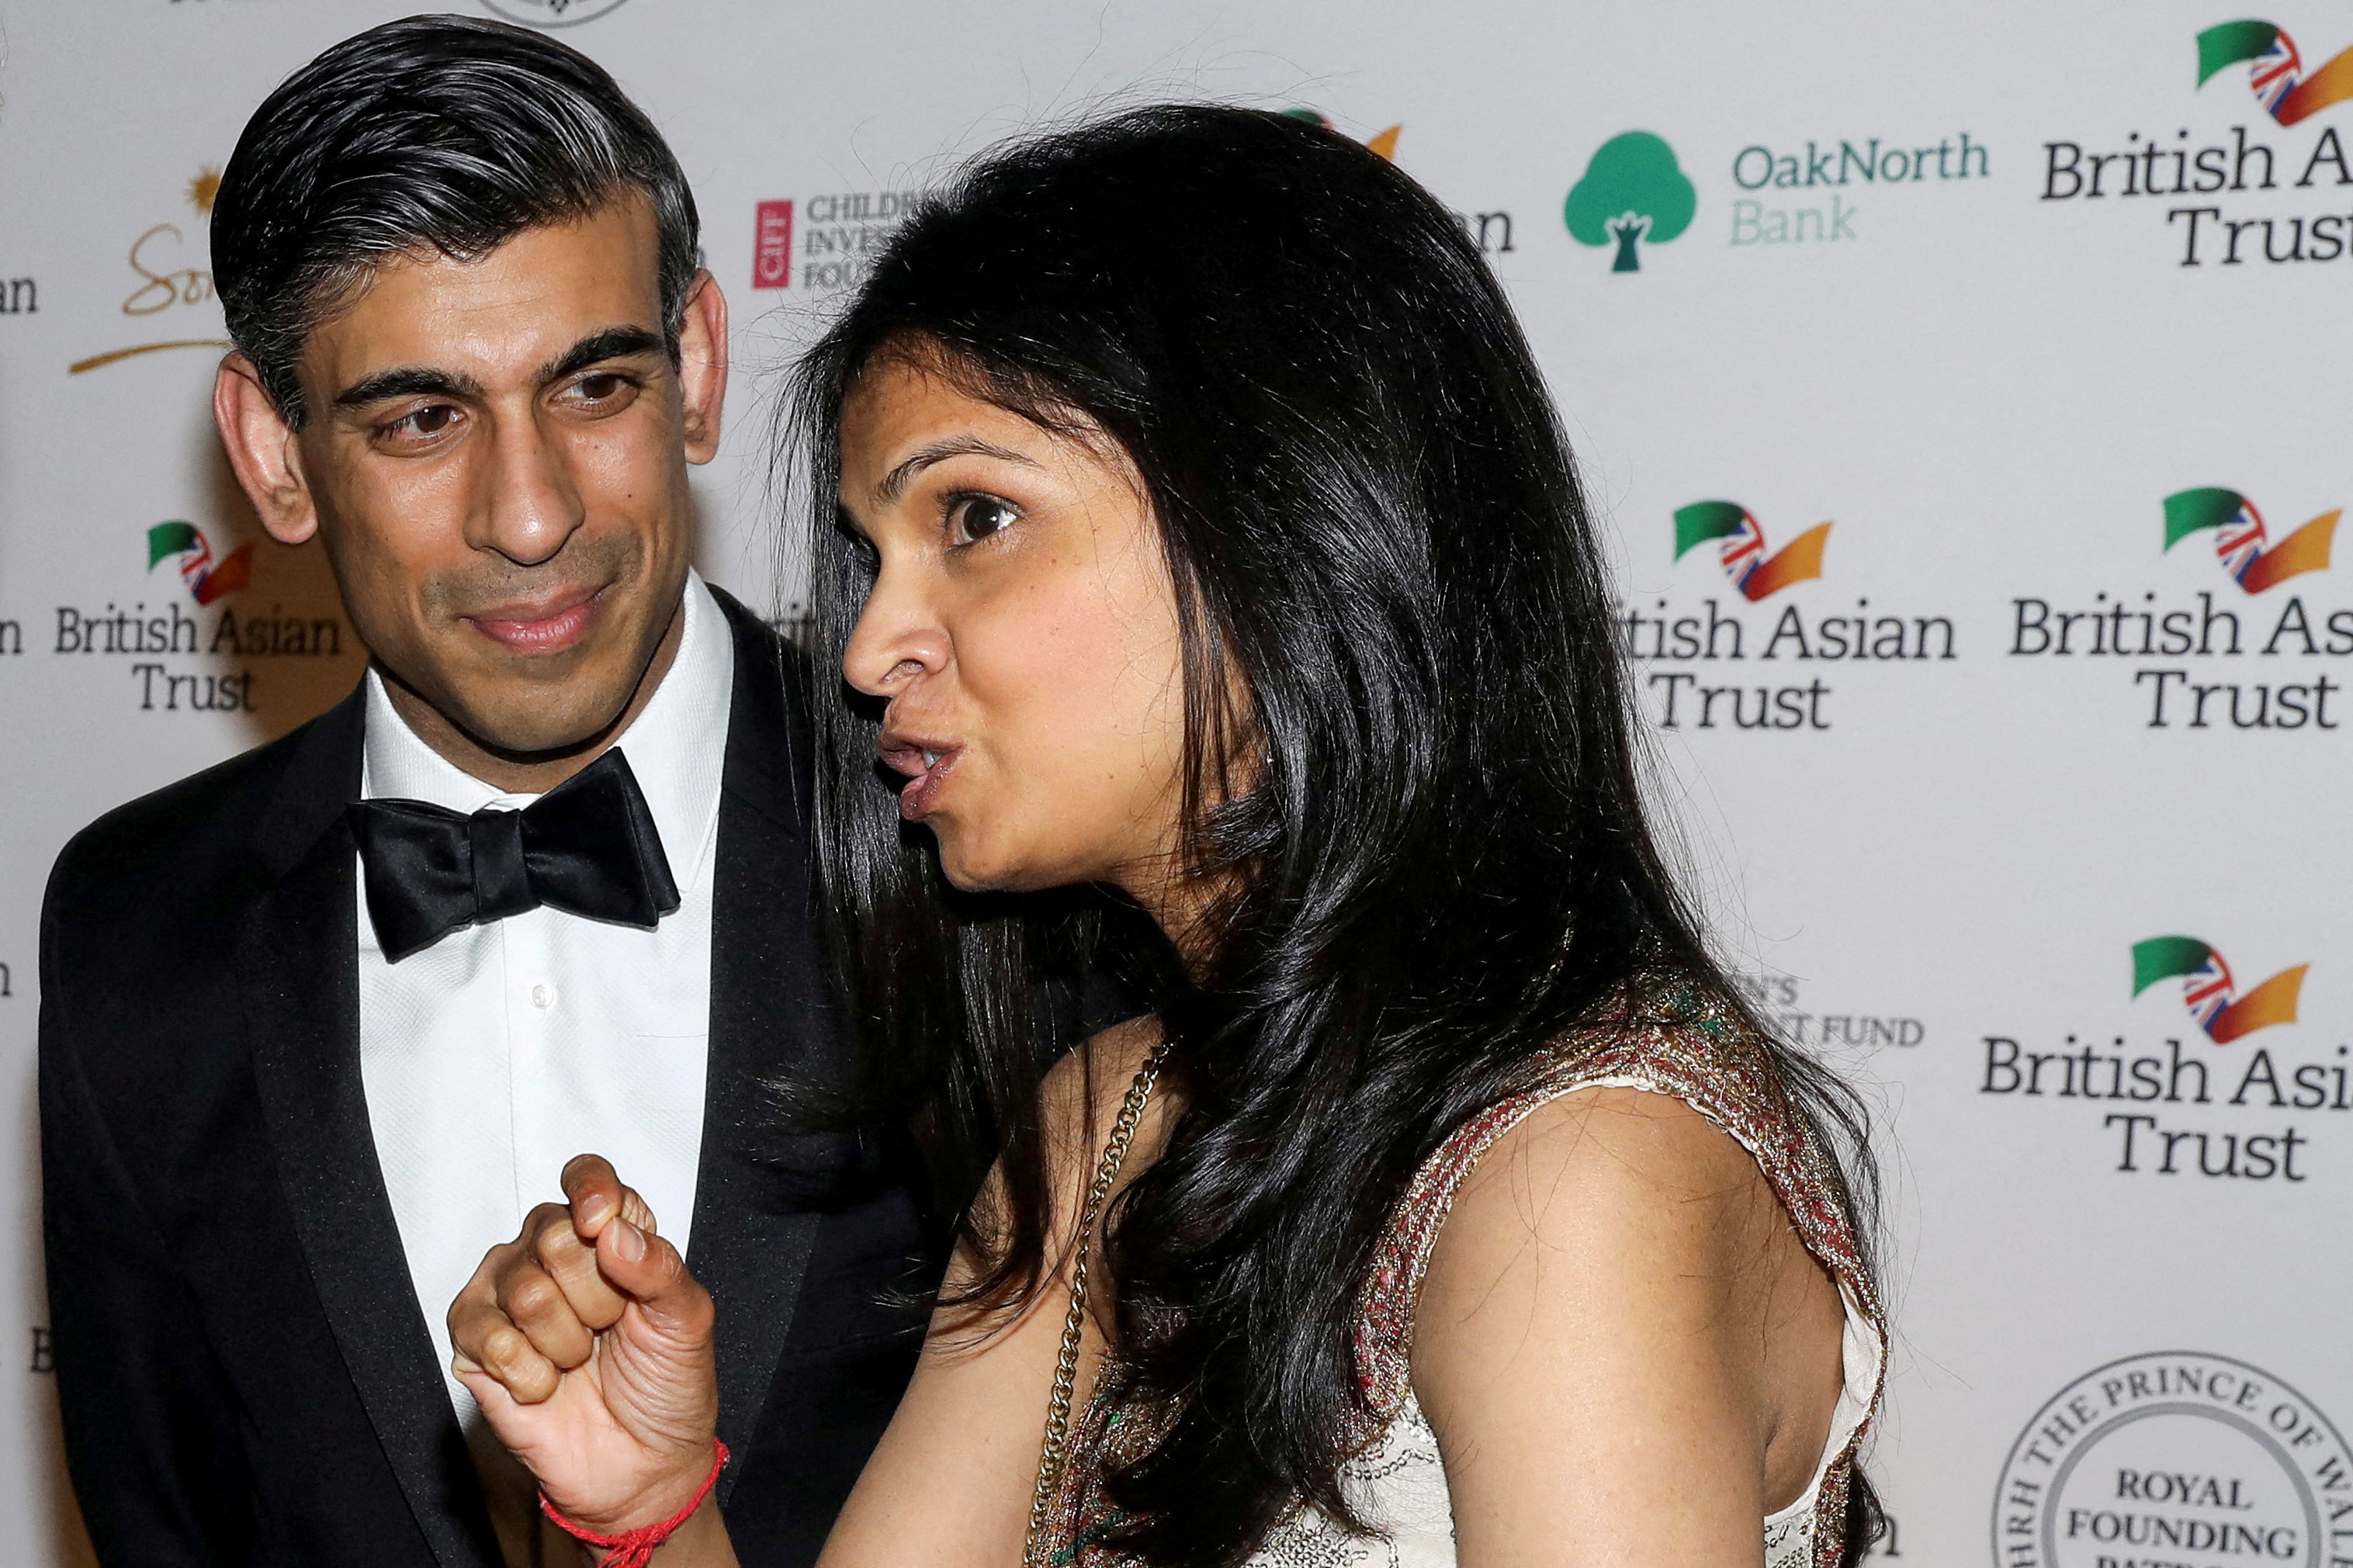 British Chancellor of the Exchequer Rishi Sunak and his wife Akshata Murthy attend a reception to celebrate the British Asian Trust at The British Museum